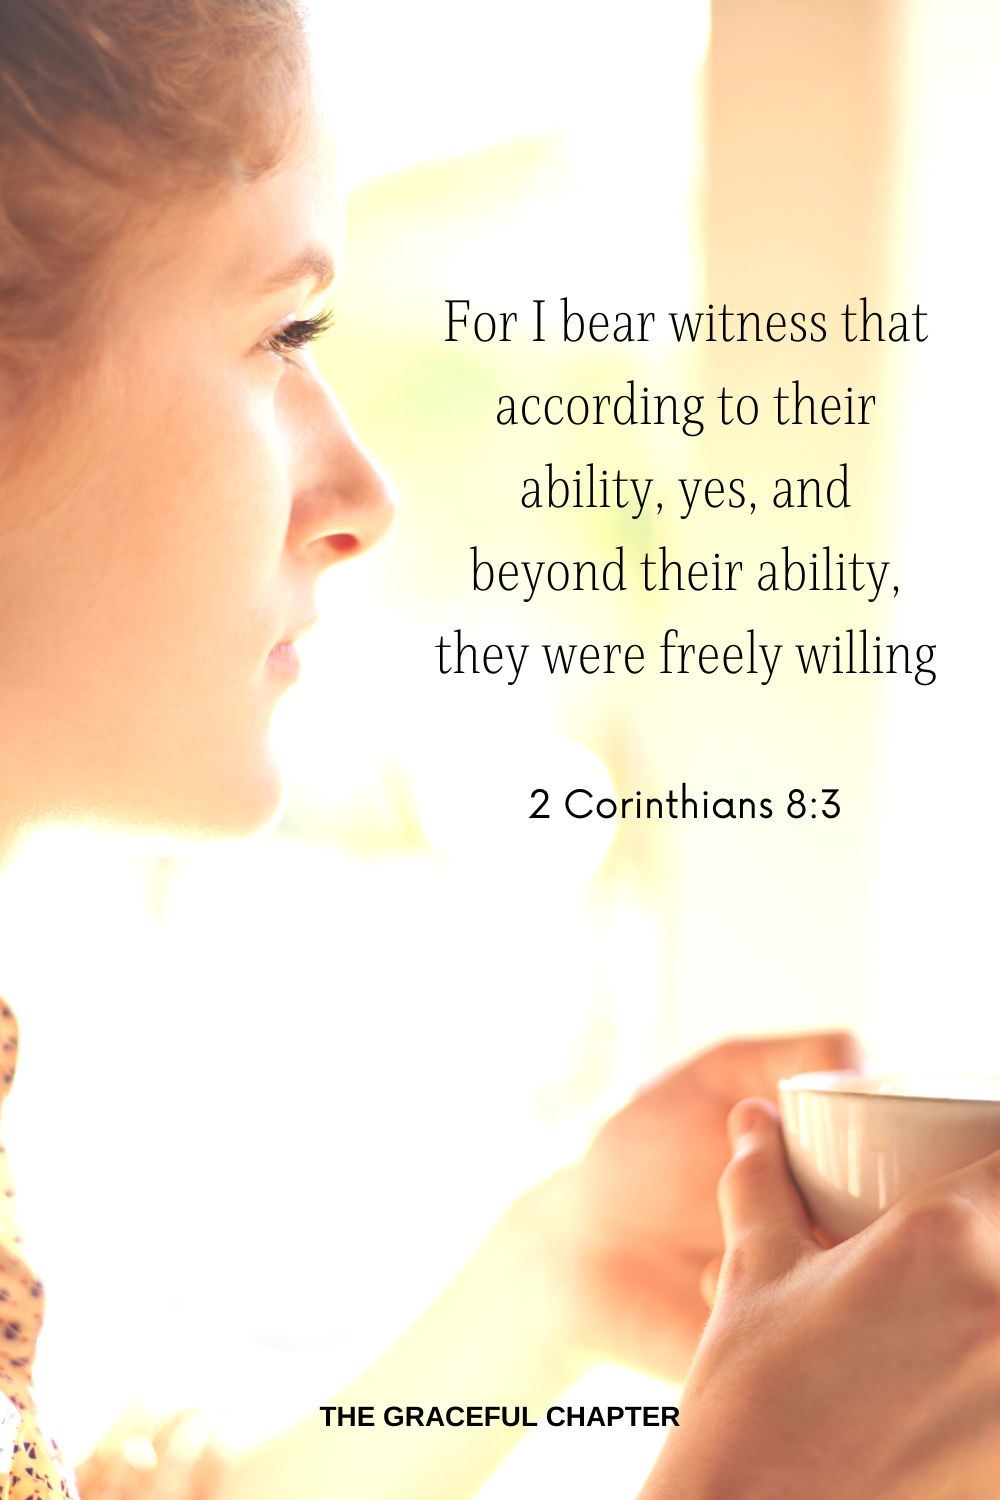 For I bear witness that according to their ability, yes, and beyond their ability, they were freely willing. 2 Corinthians 8:3